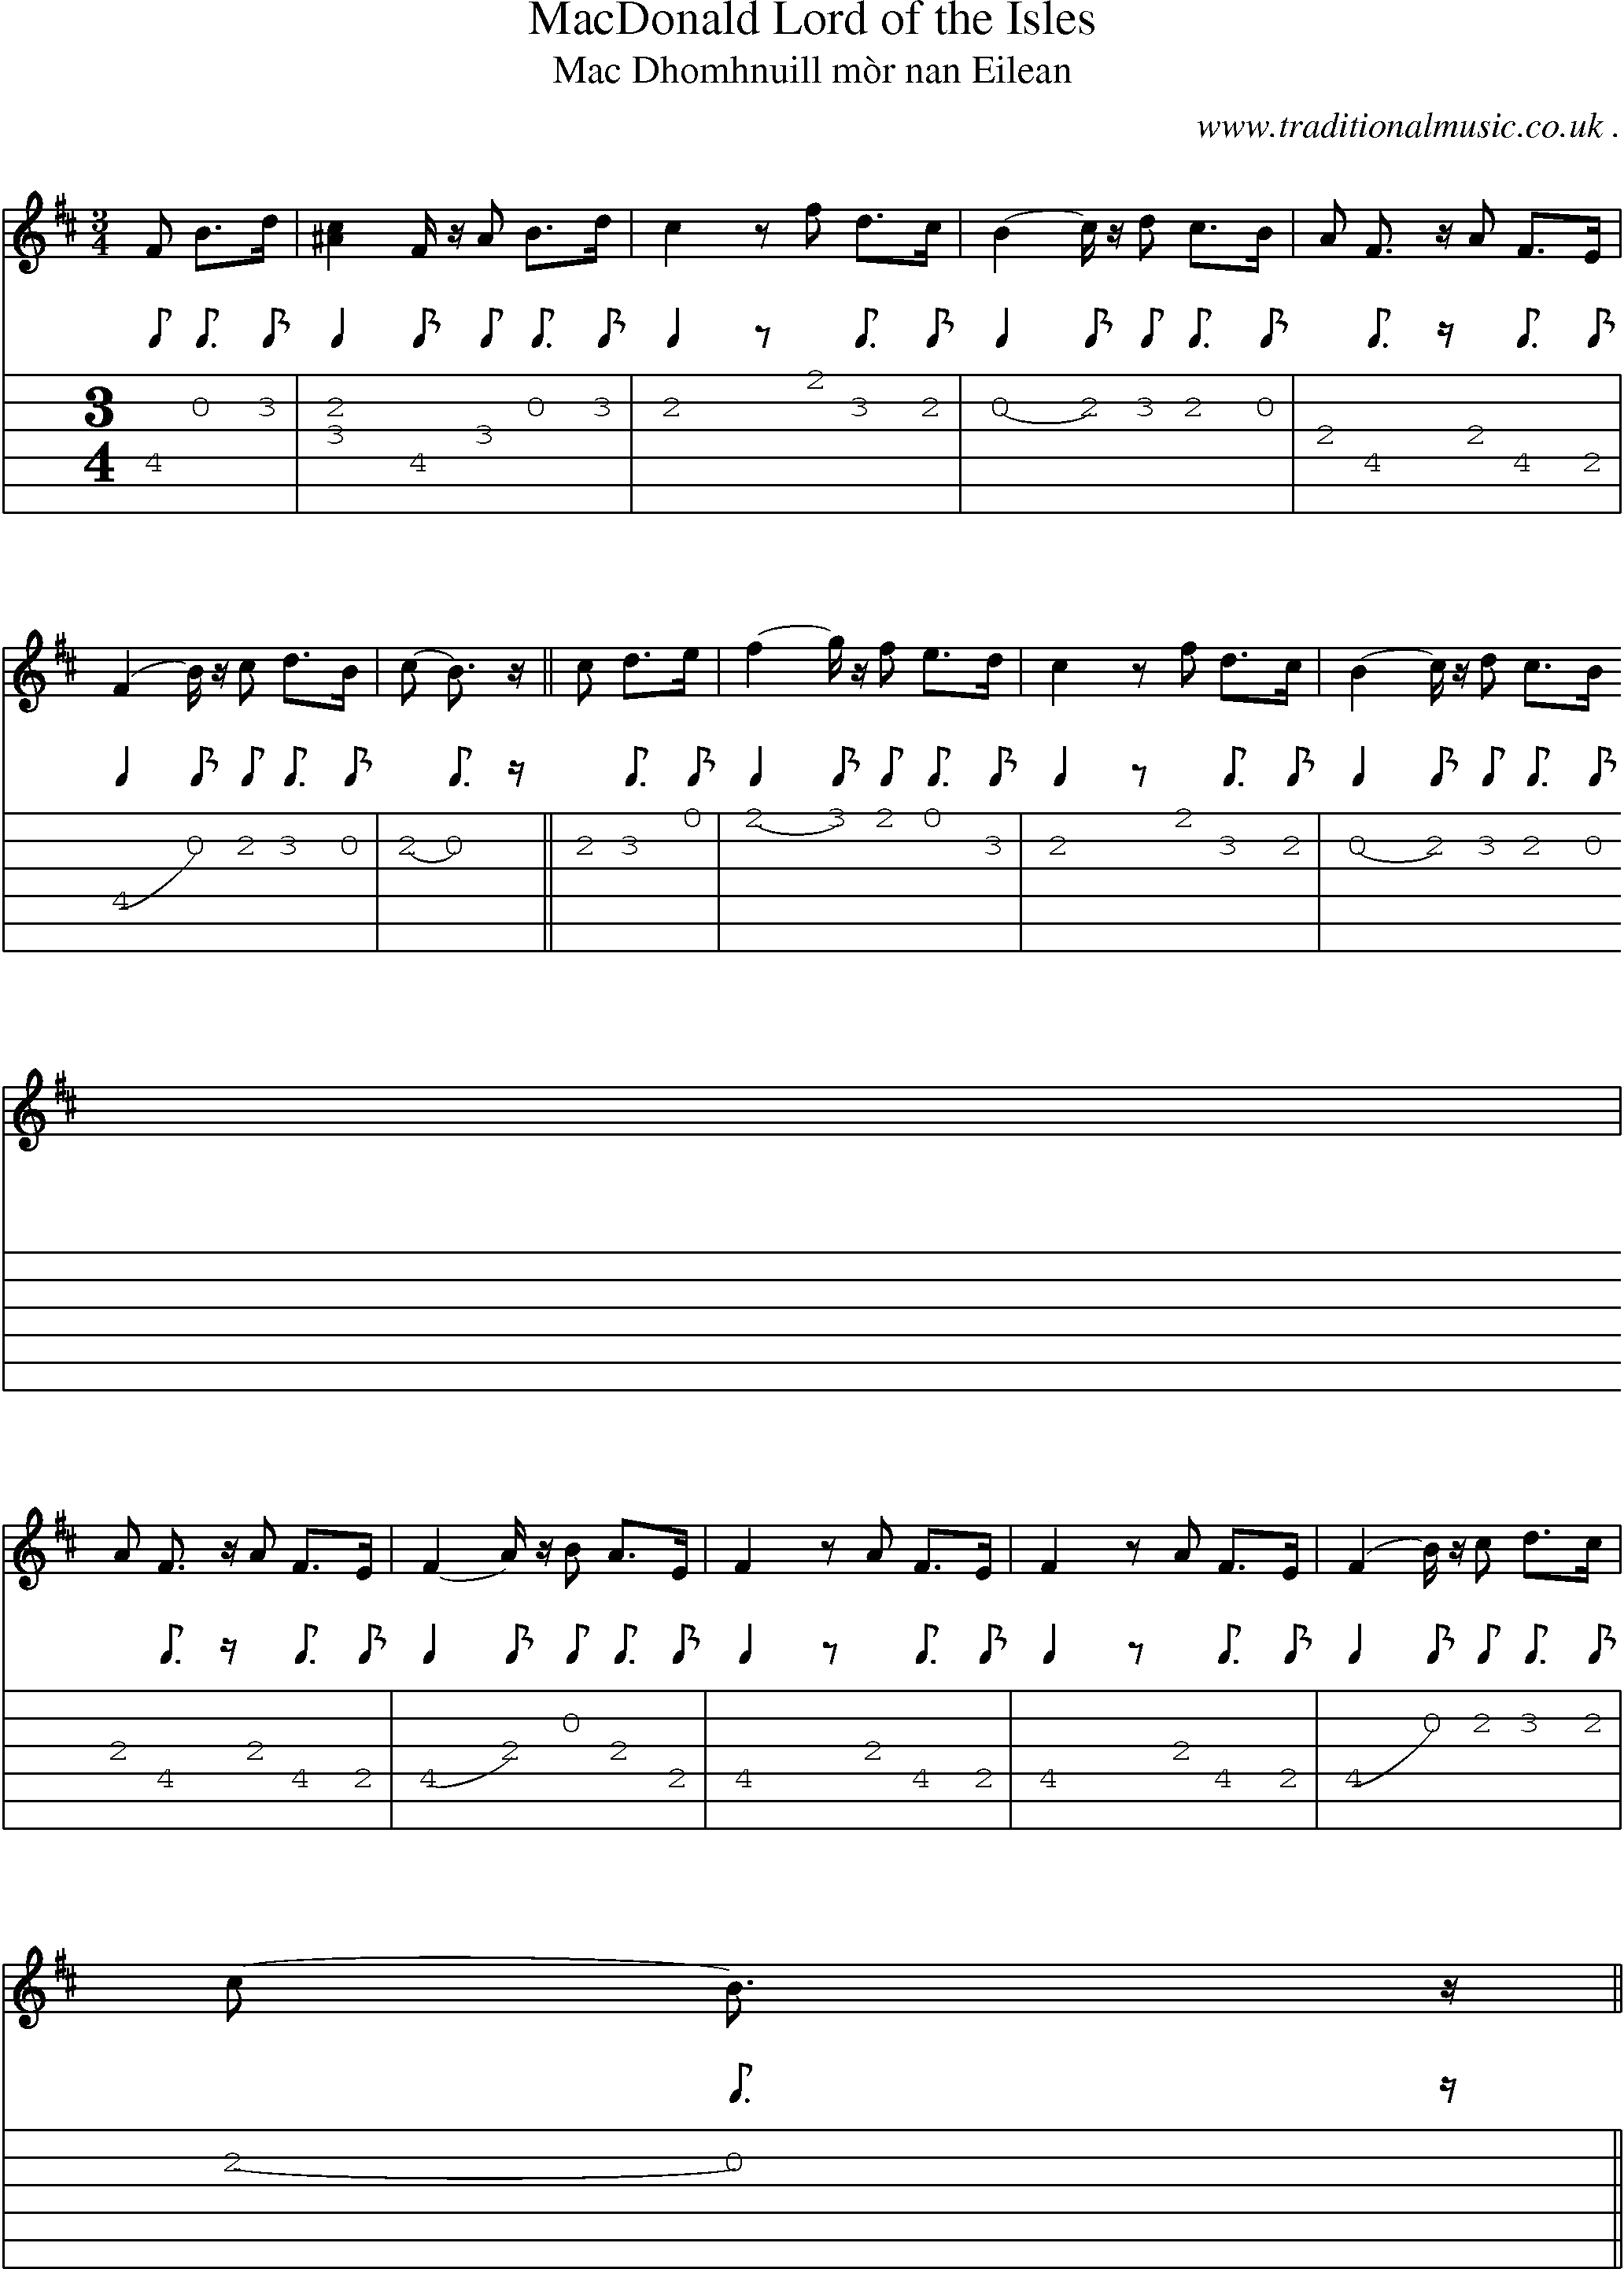 Sheet-music  score, Chords and Guitar Tabs for Macdonald Lord Of The Isles